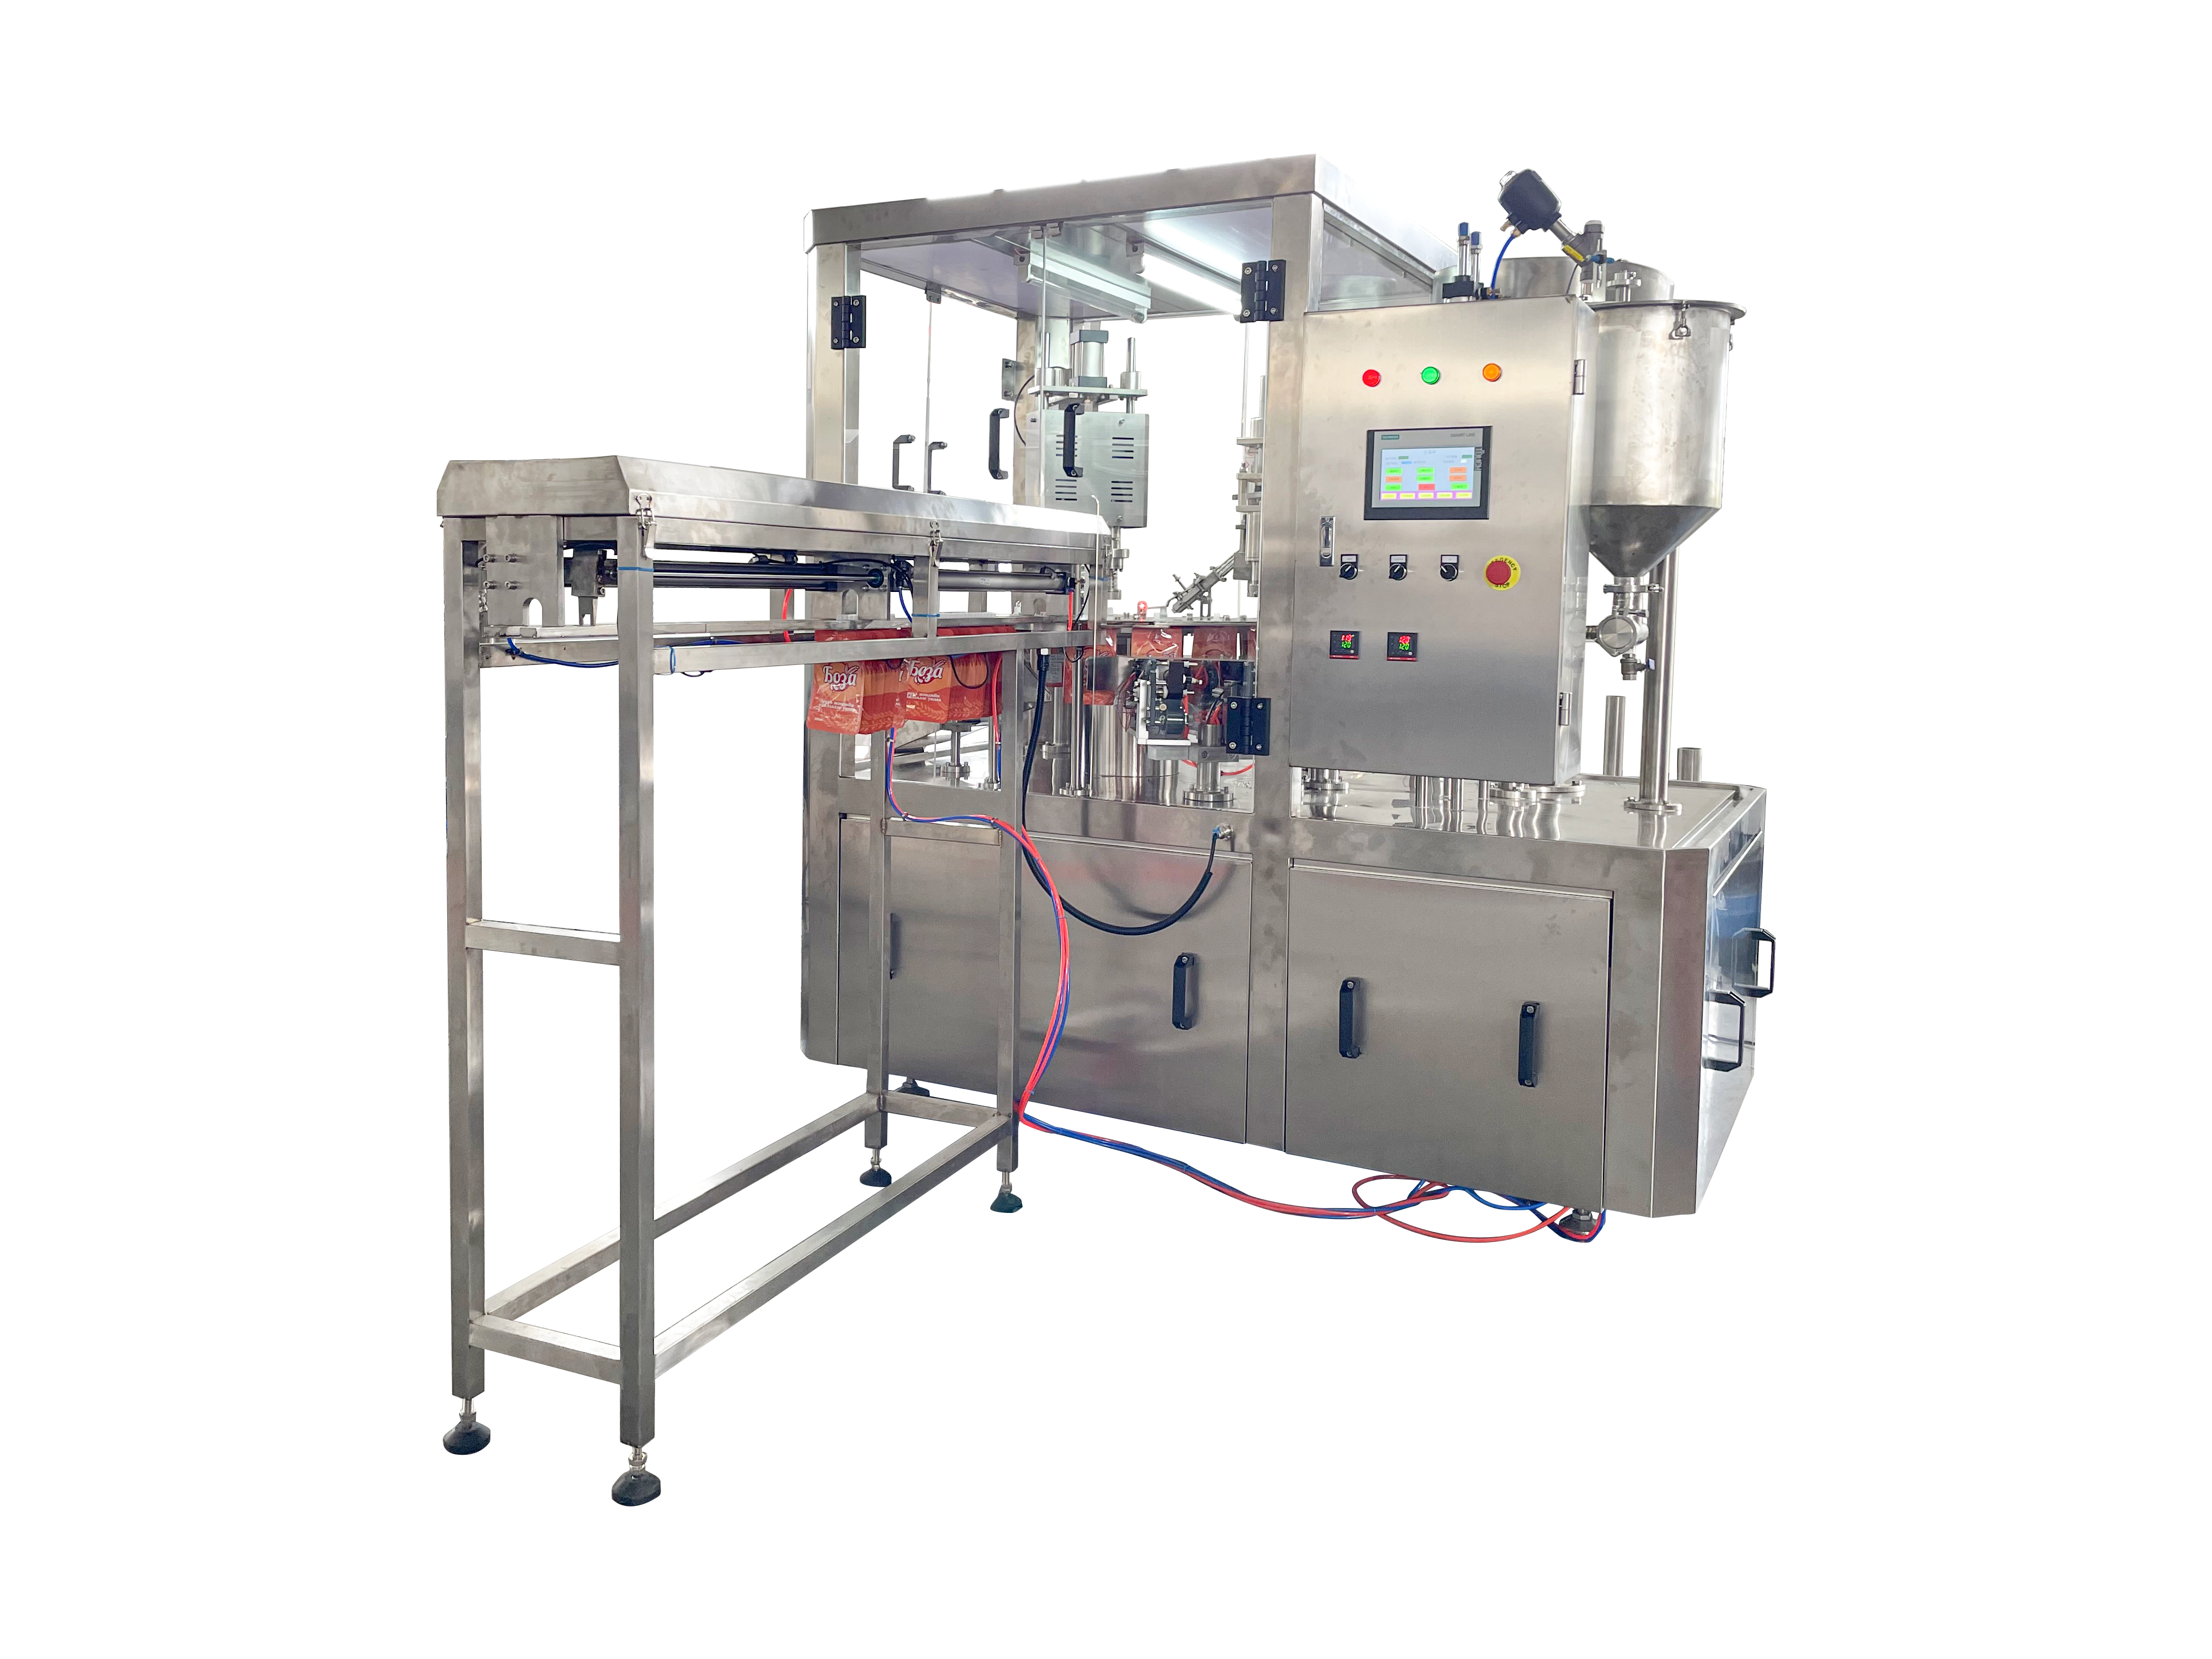 ZLD-A series stand-up pouch filling and cap-screwing machine